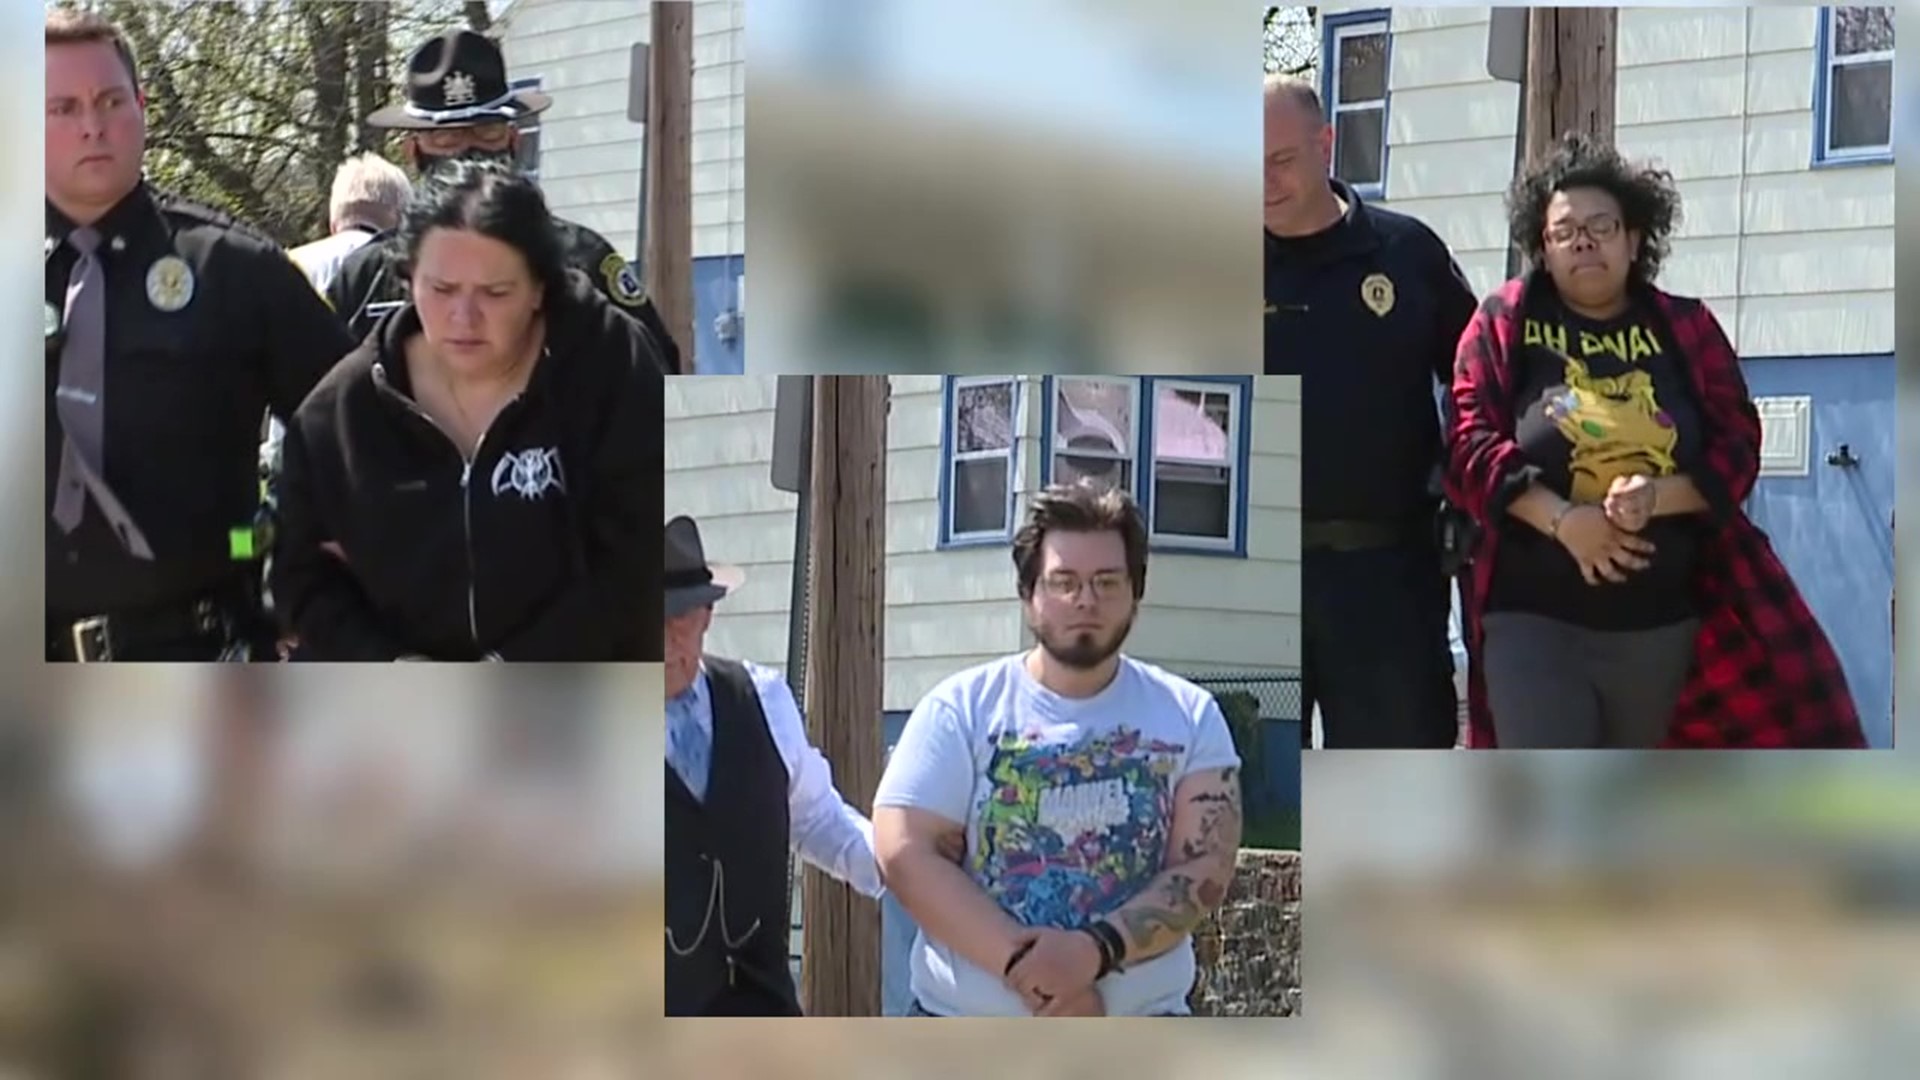 Two parents and a step-grandparent are under arrest in Schuylkill County. Cops believe they locked three children in an attic and deprived them of food and water.